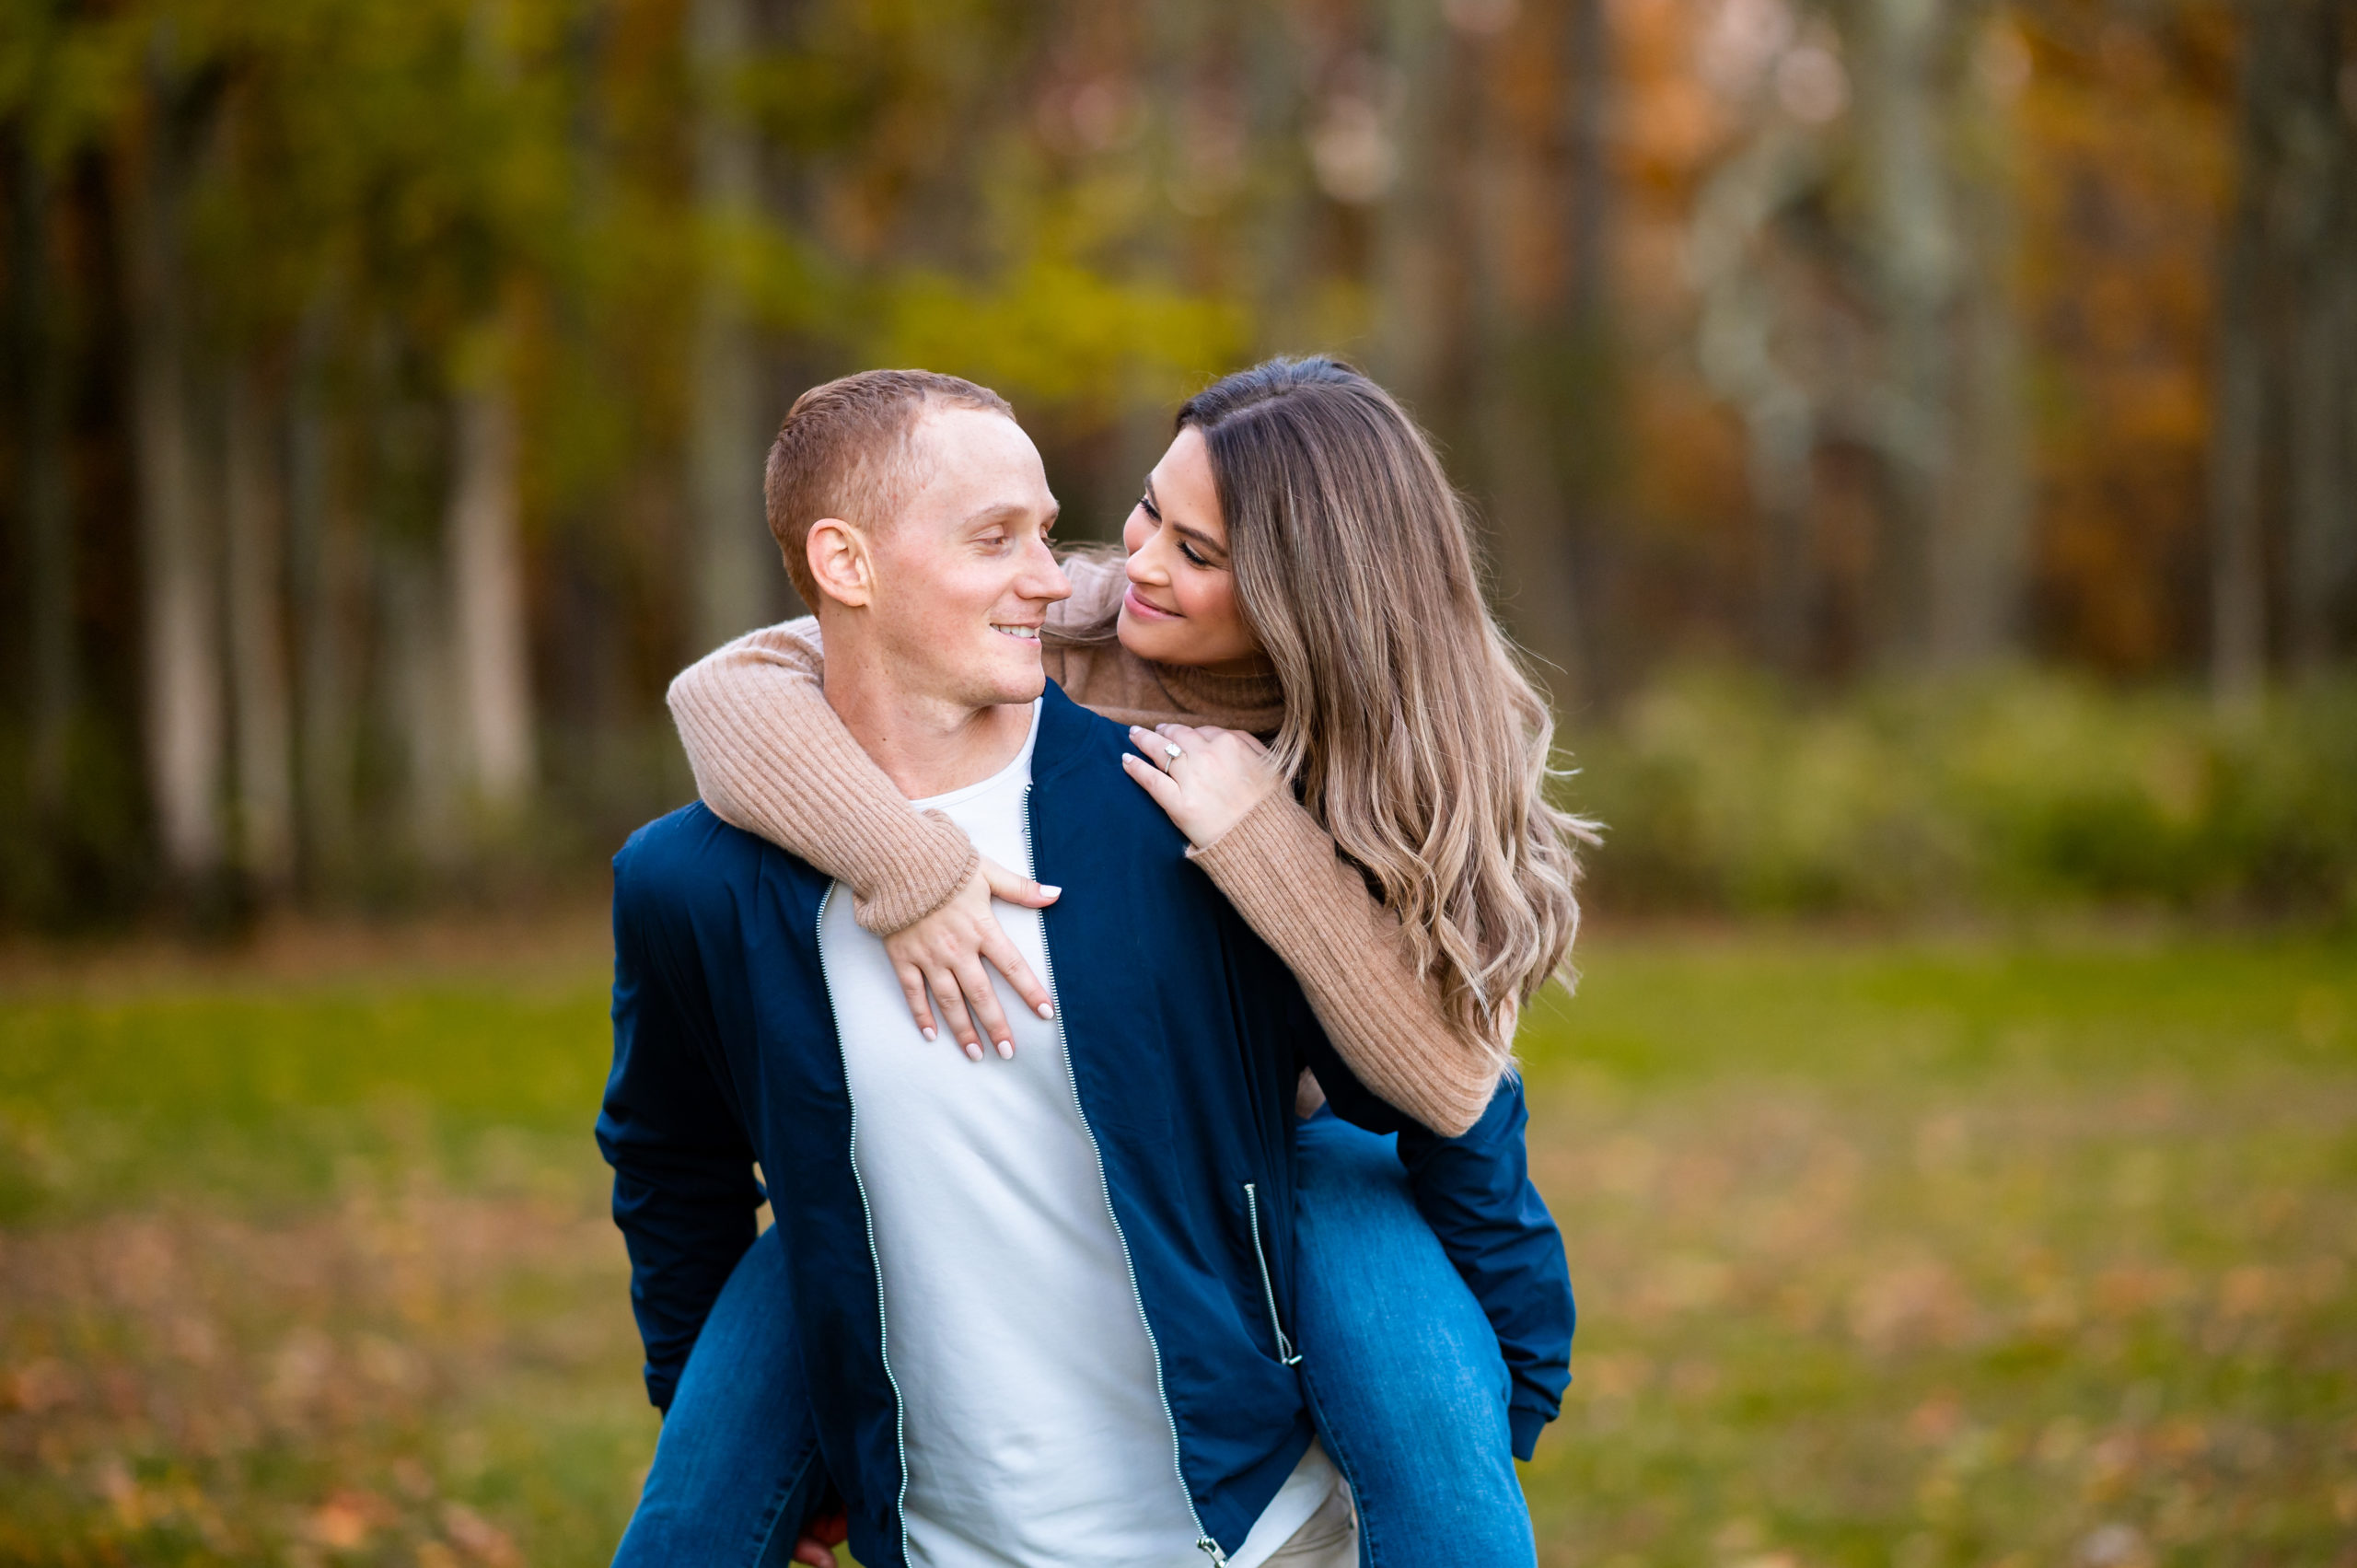 Engagement photo of a woman piggybacking on her fiancee in Central NJ